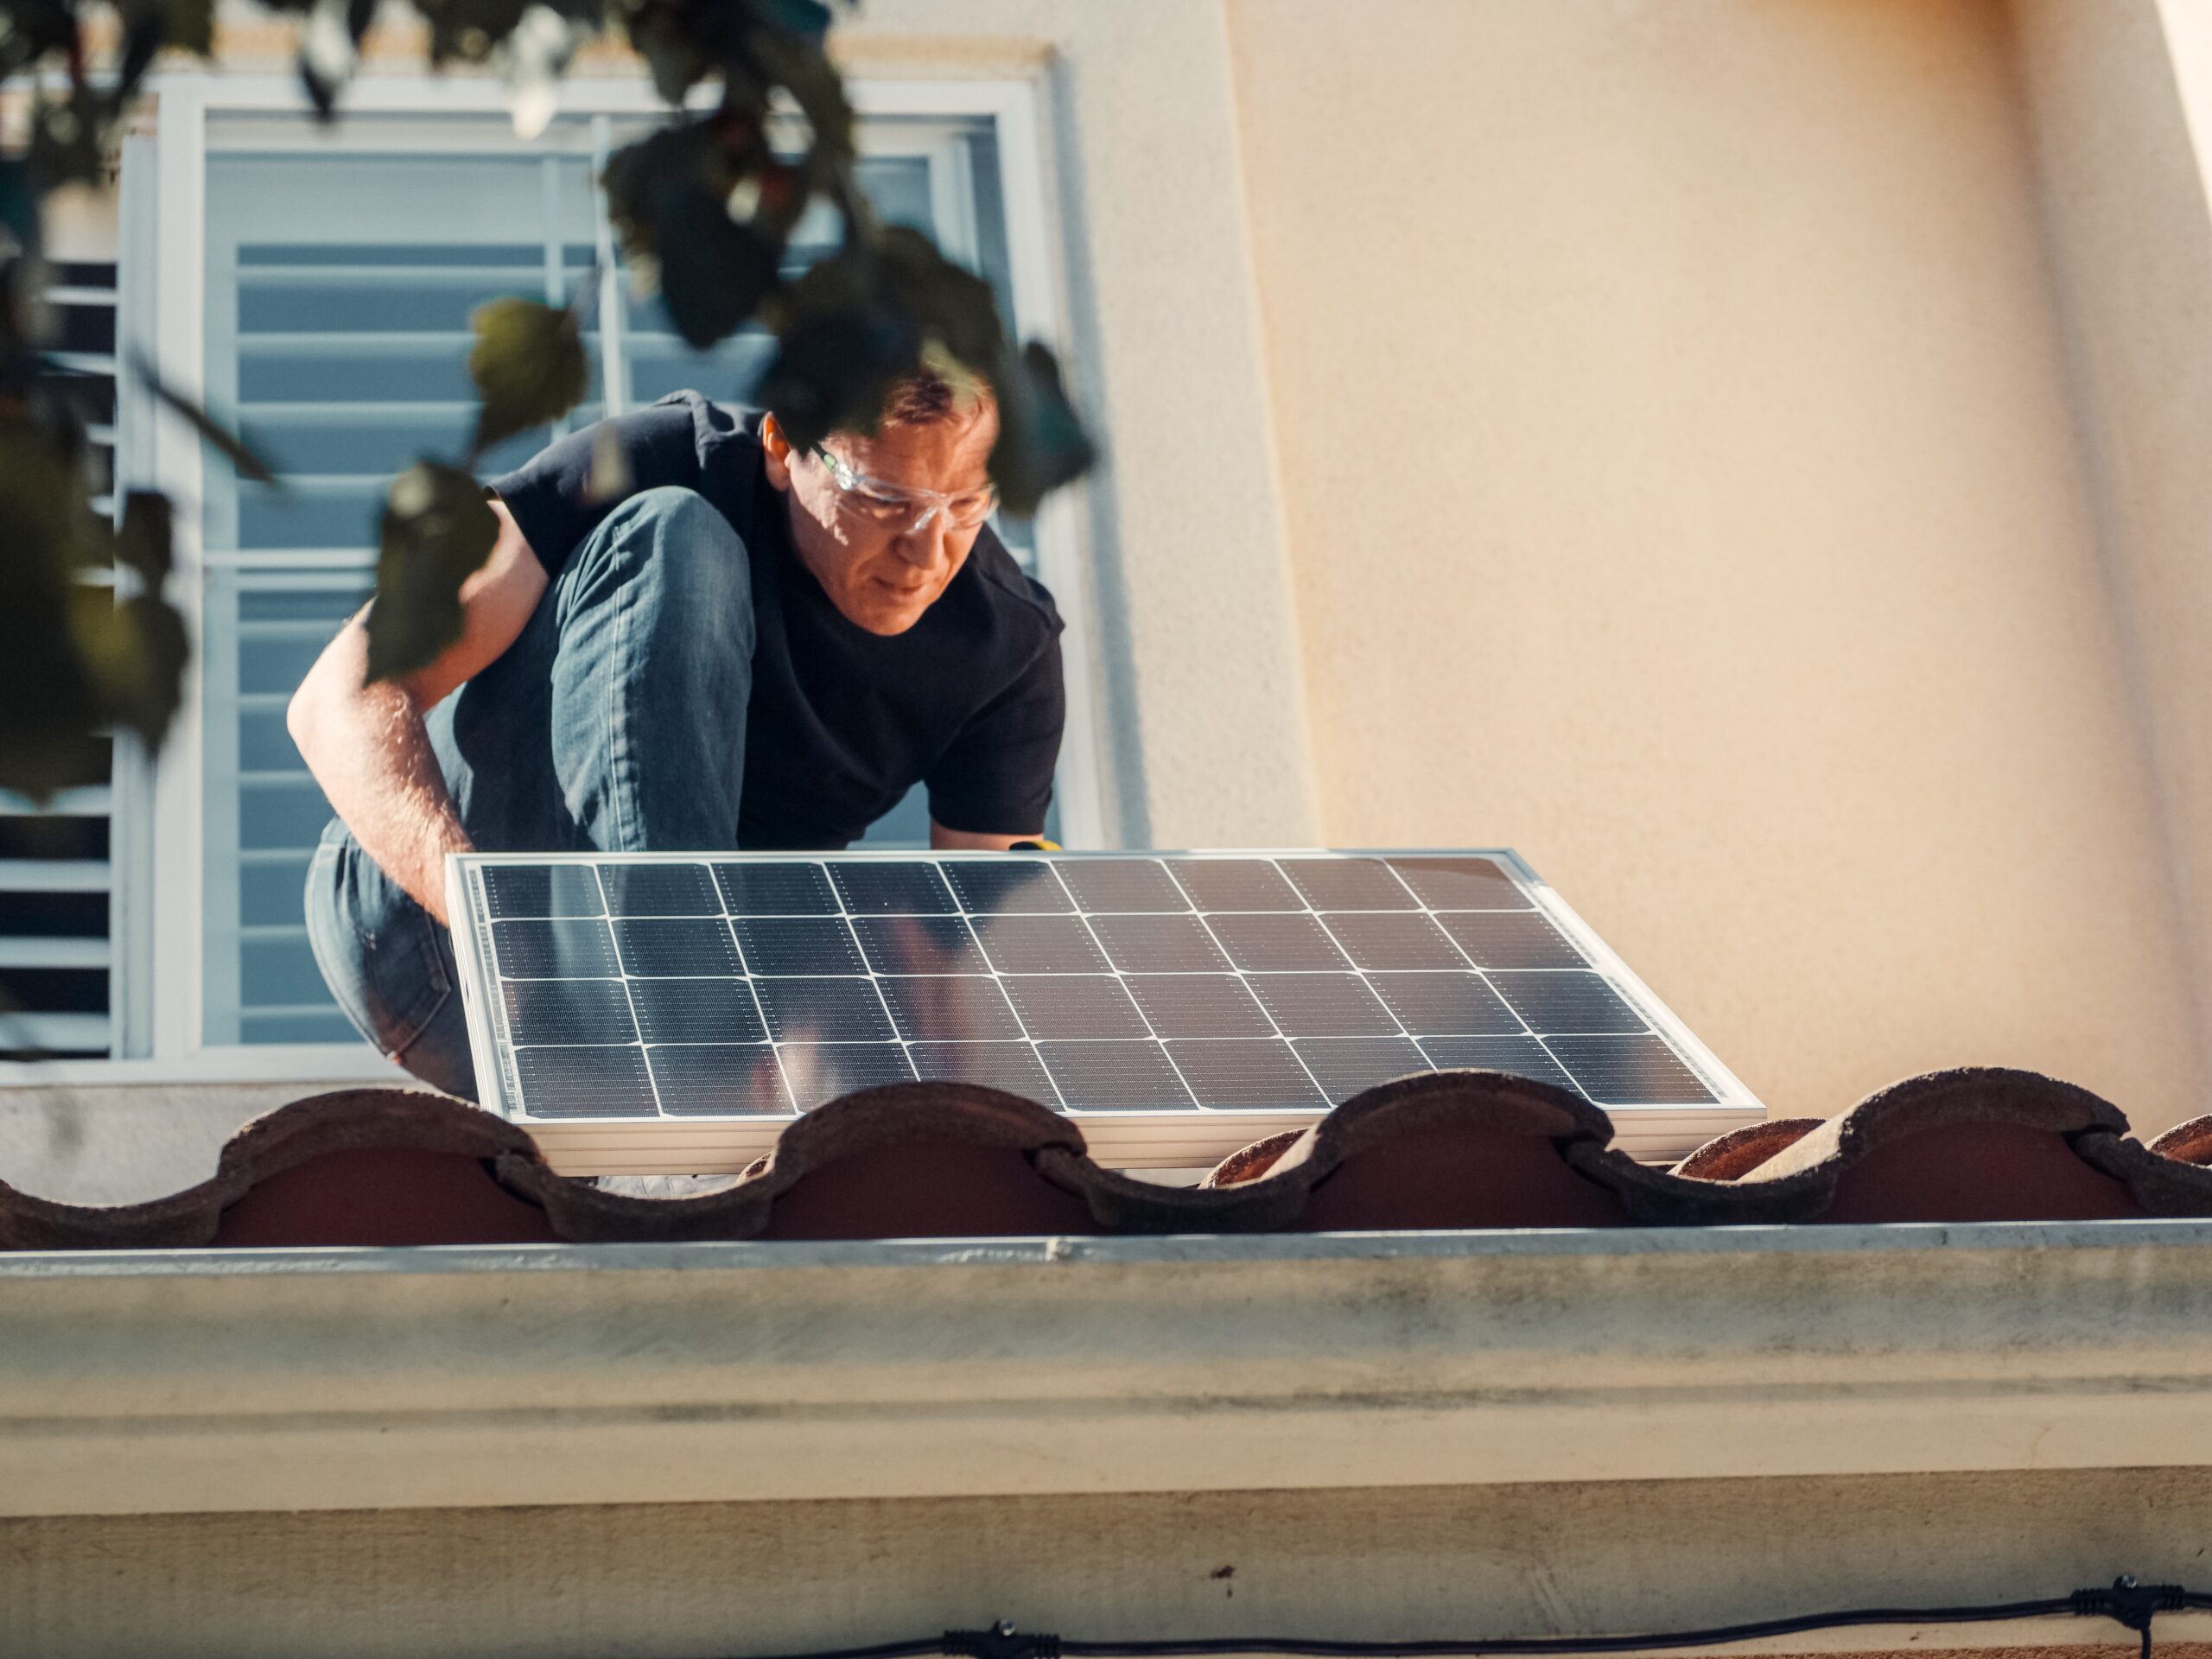 A man replacing a solar panel on the house roof.